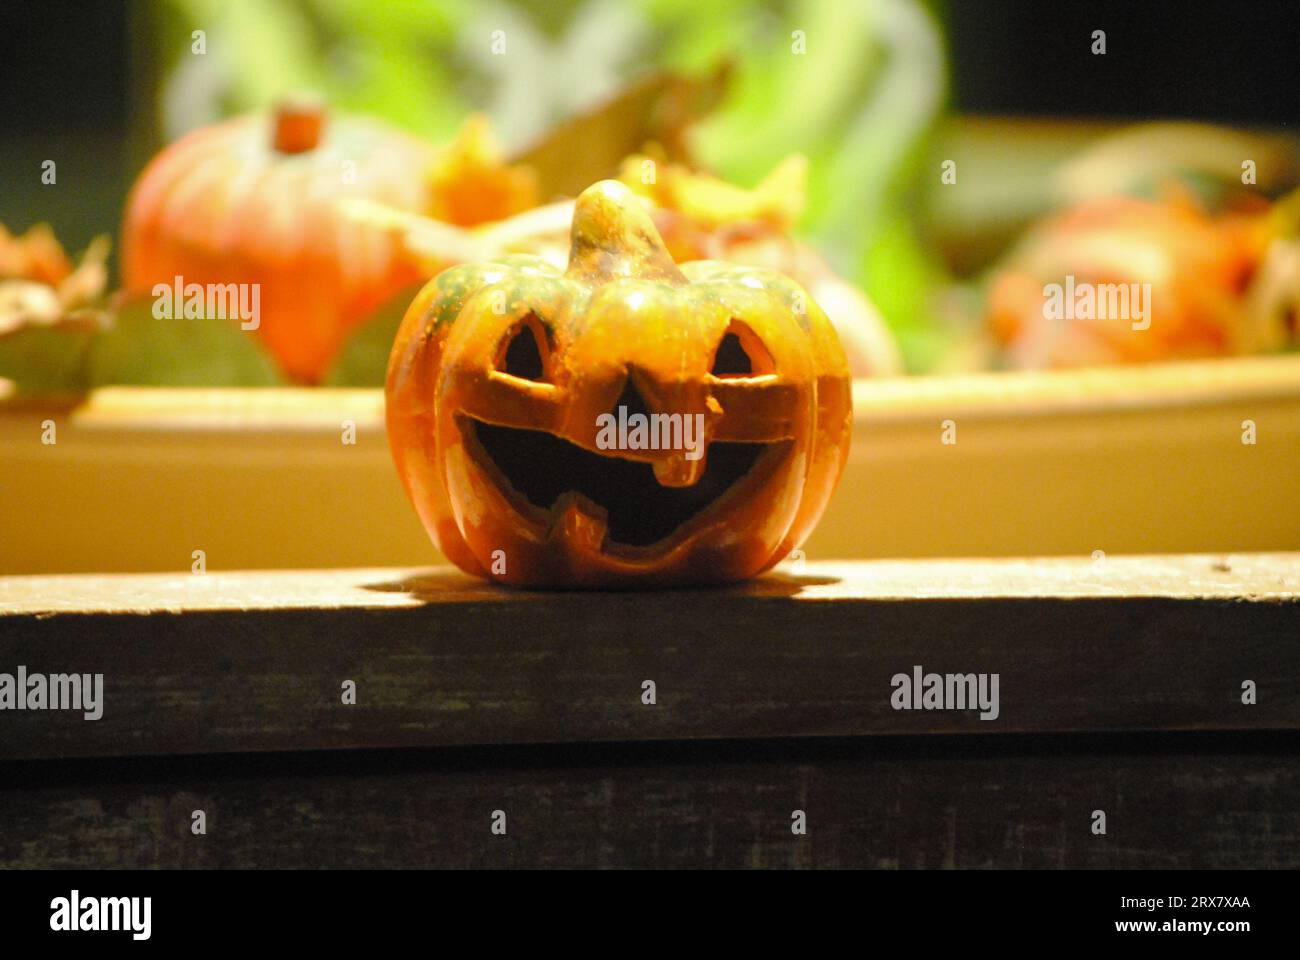 Small smiling pumpkin in shadows with others in background as Halloween time Stock Photo